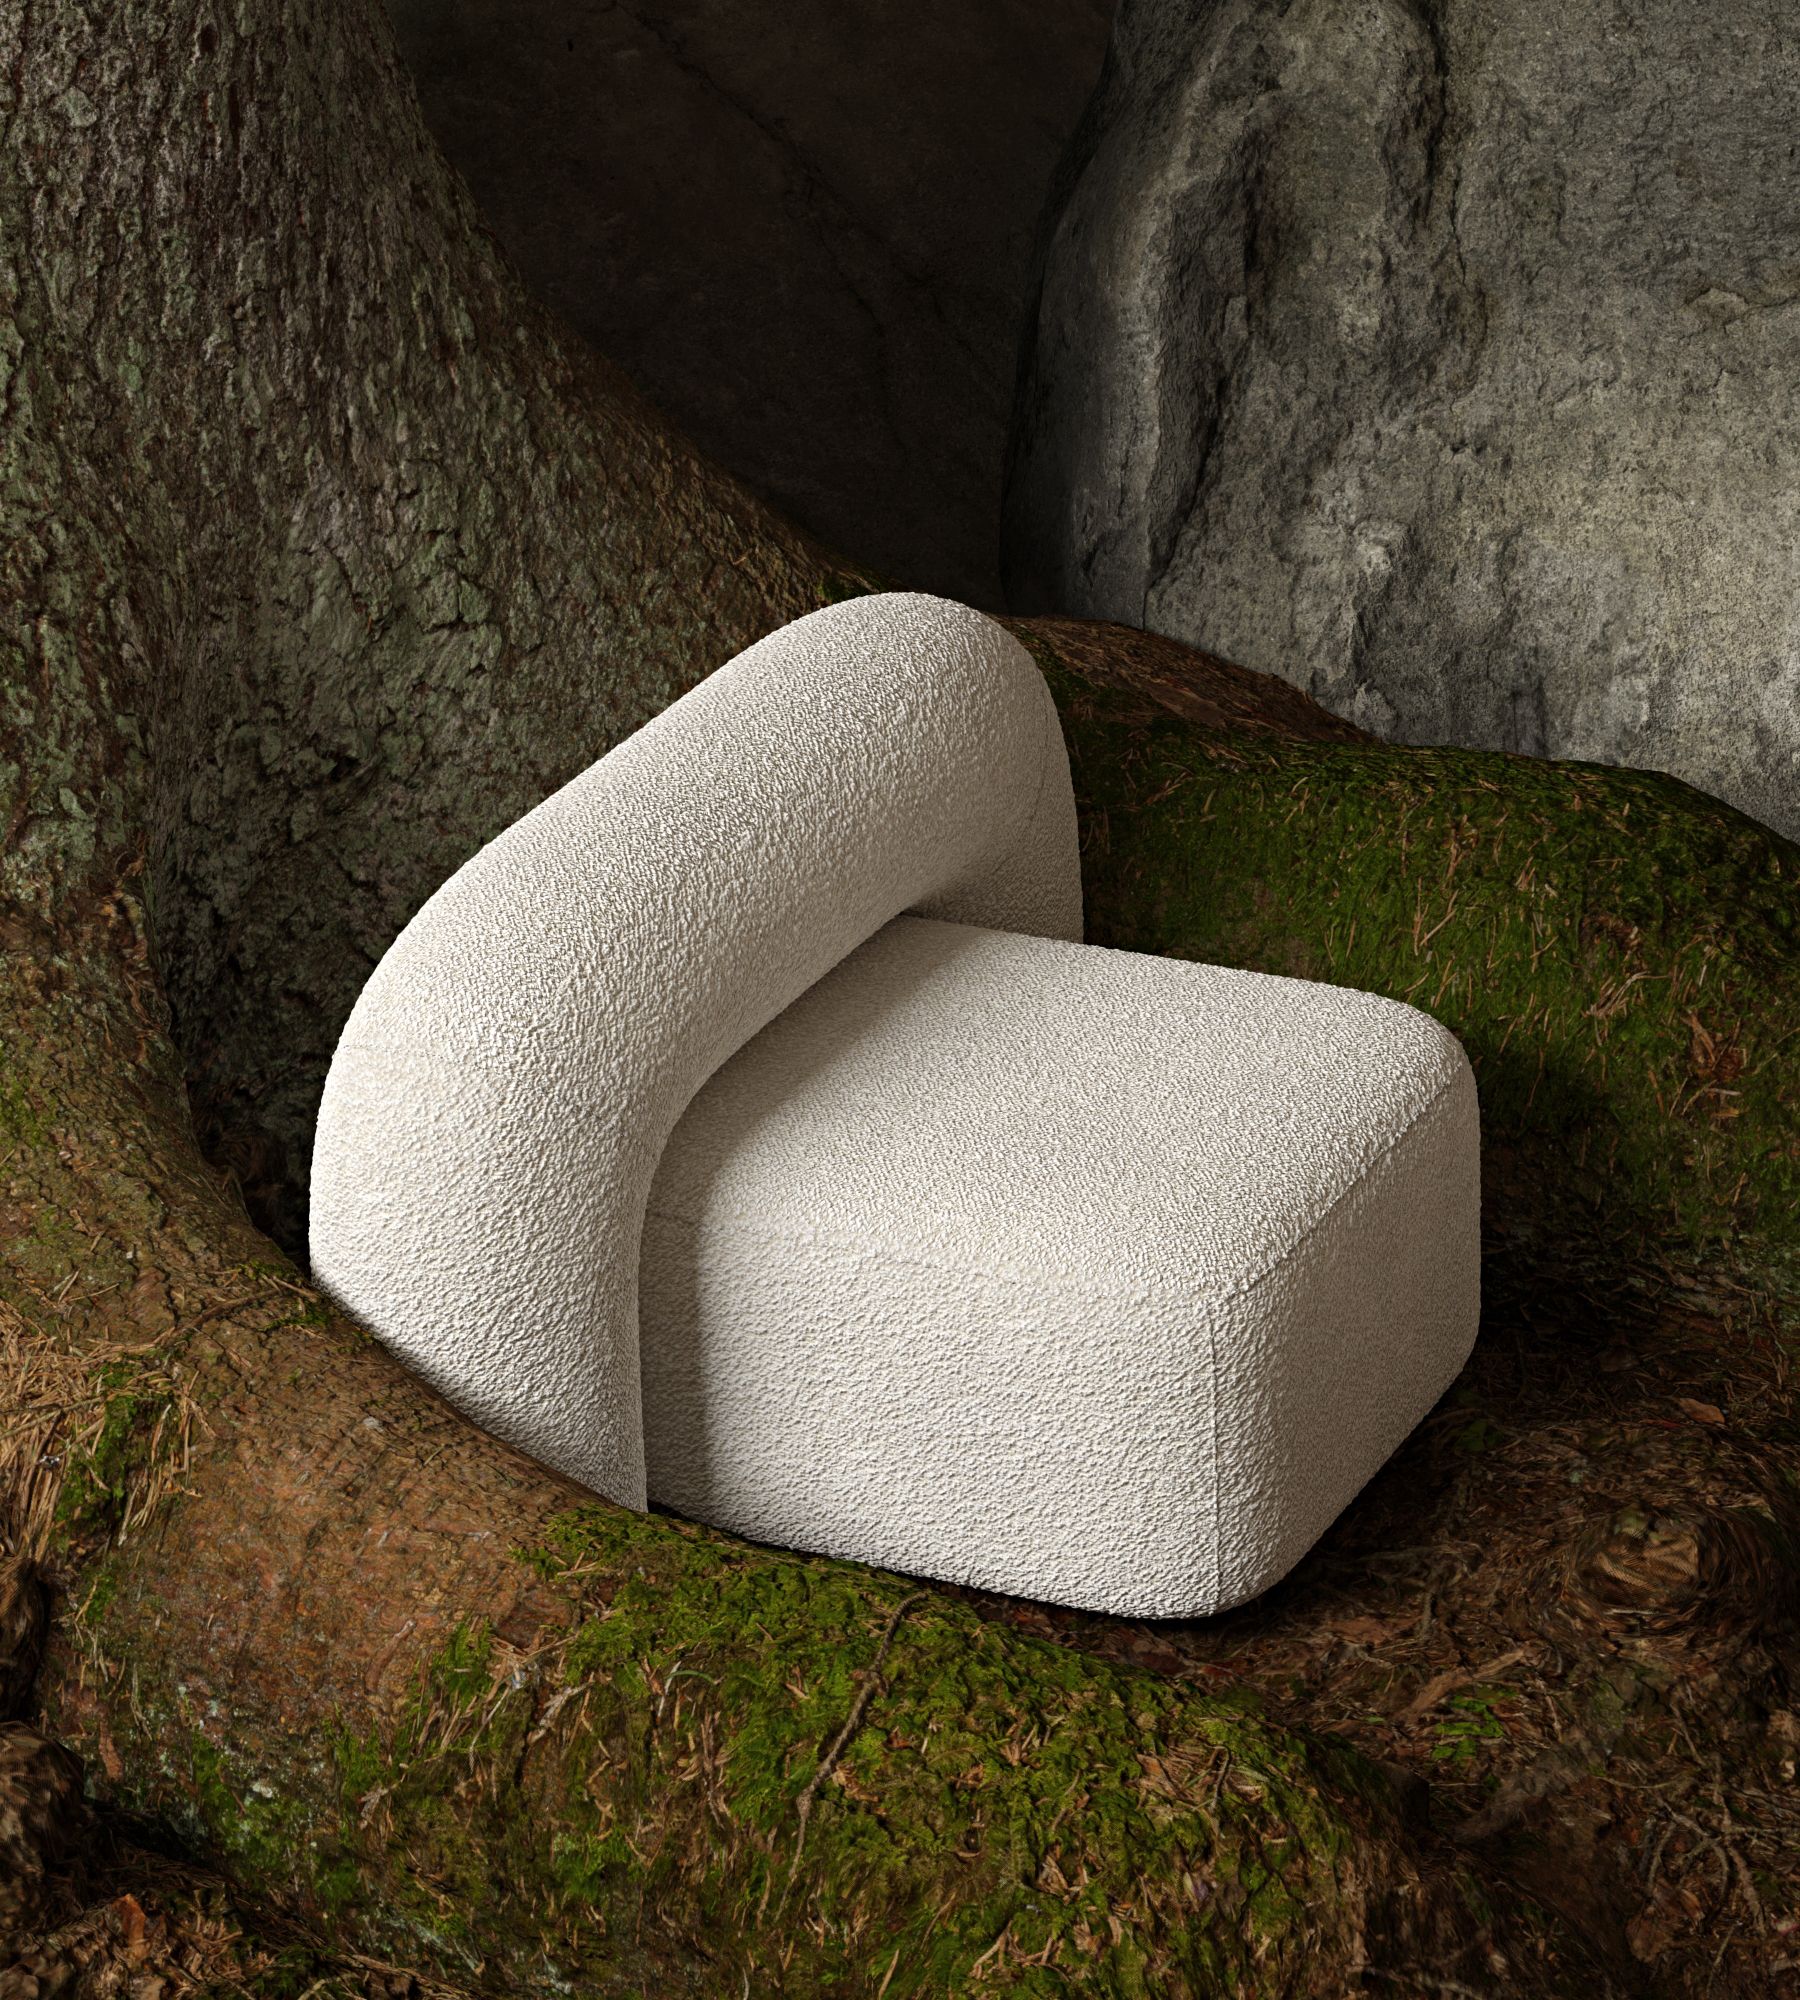 Moss inspired Pavel Vetrov's new furniture collection